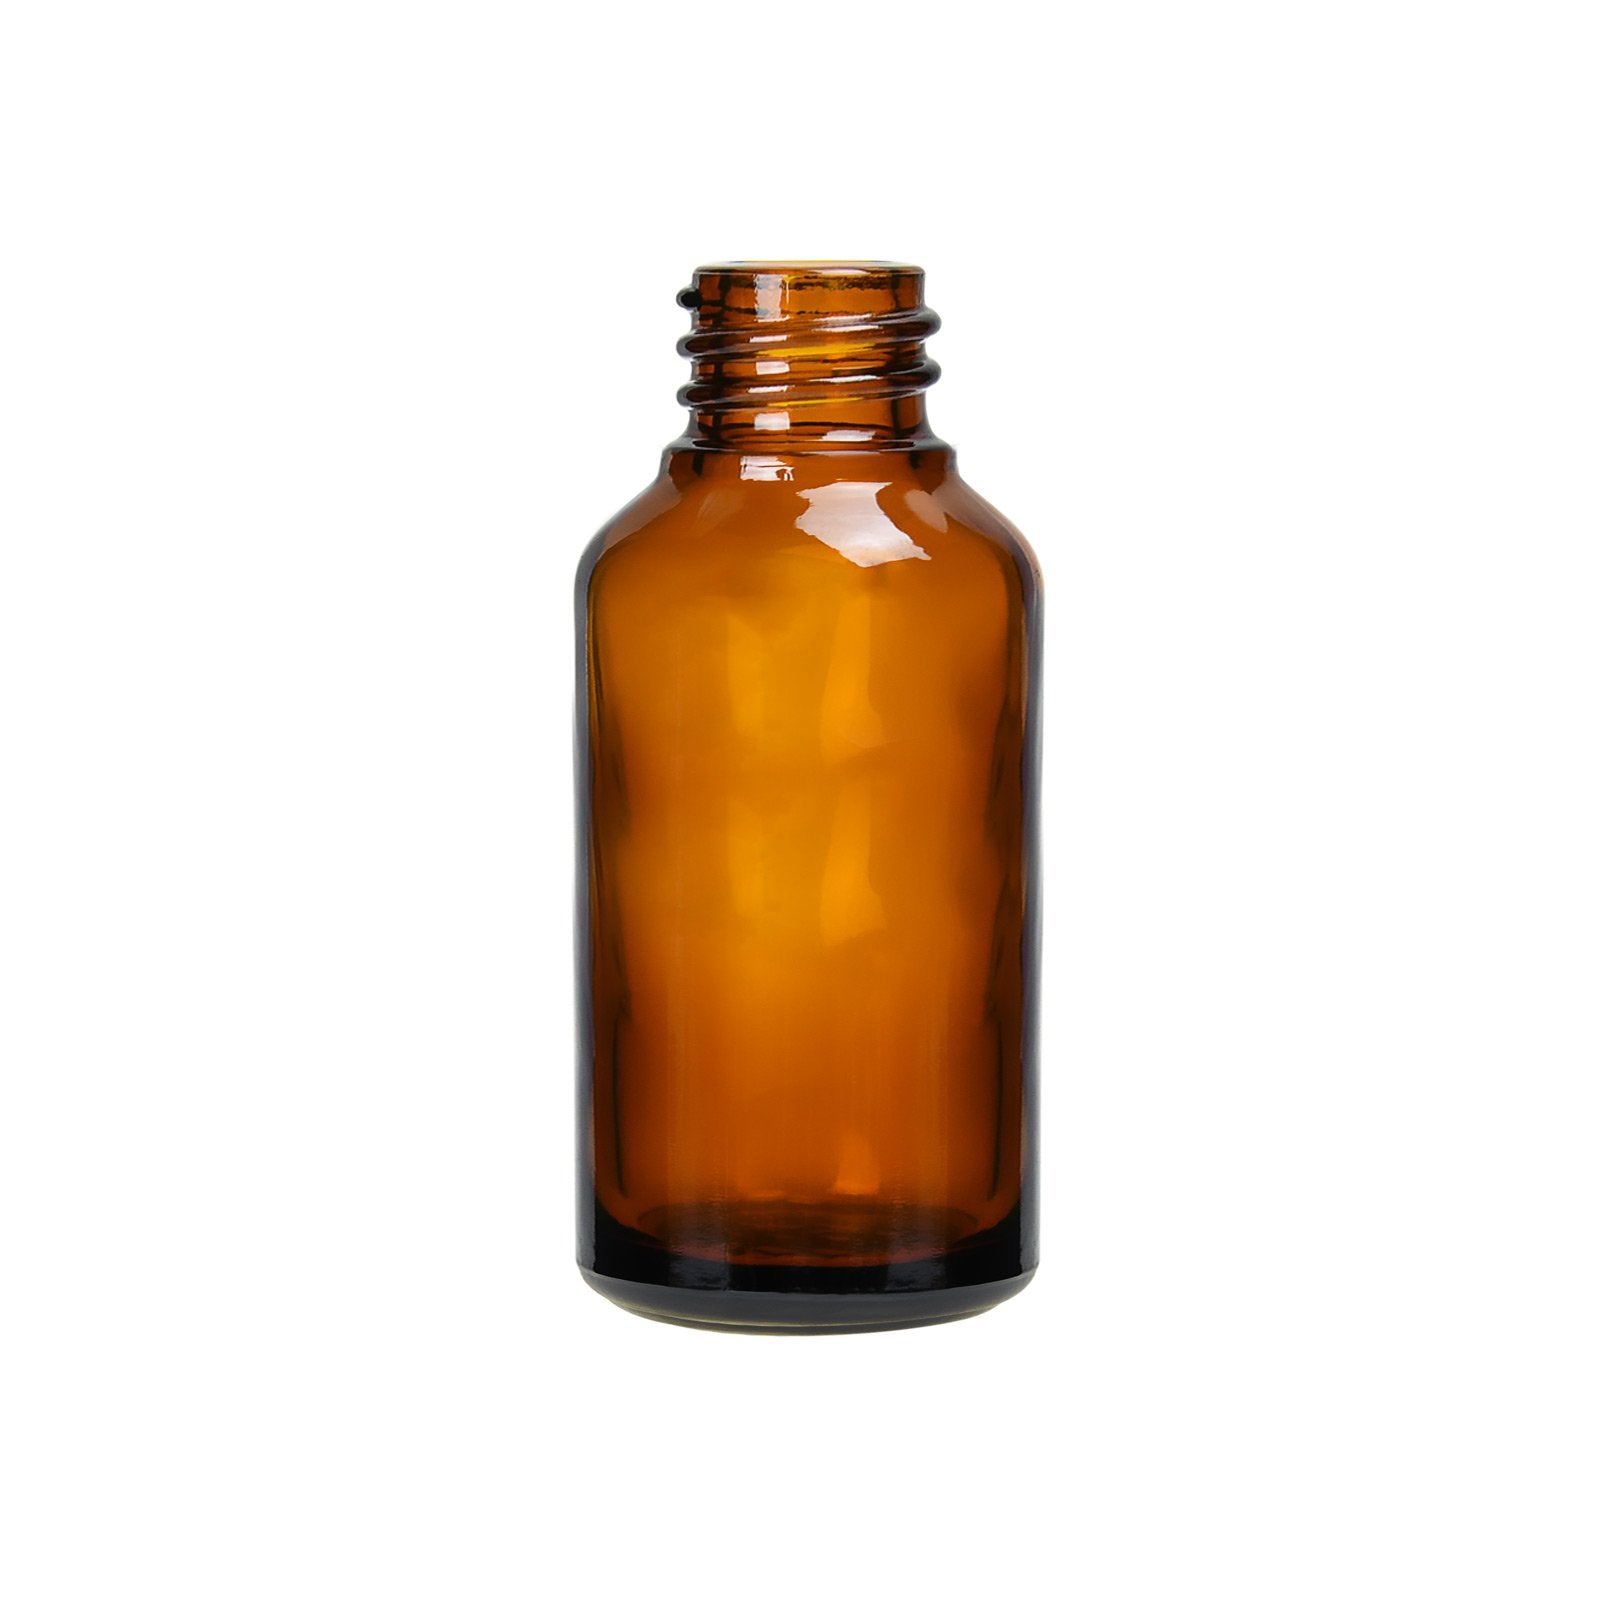 30ml / 1oz Glass Tincture Graduated Dropper Bottles - Amber - 110 Count